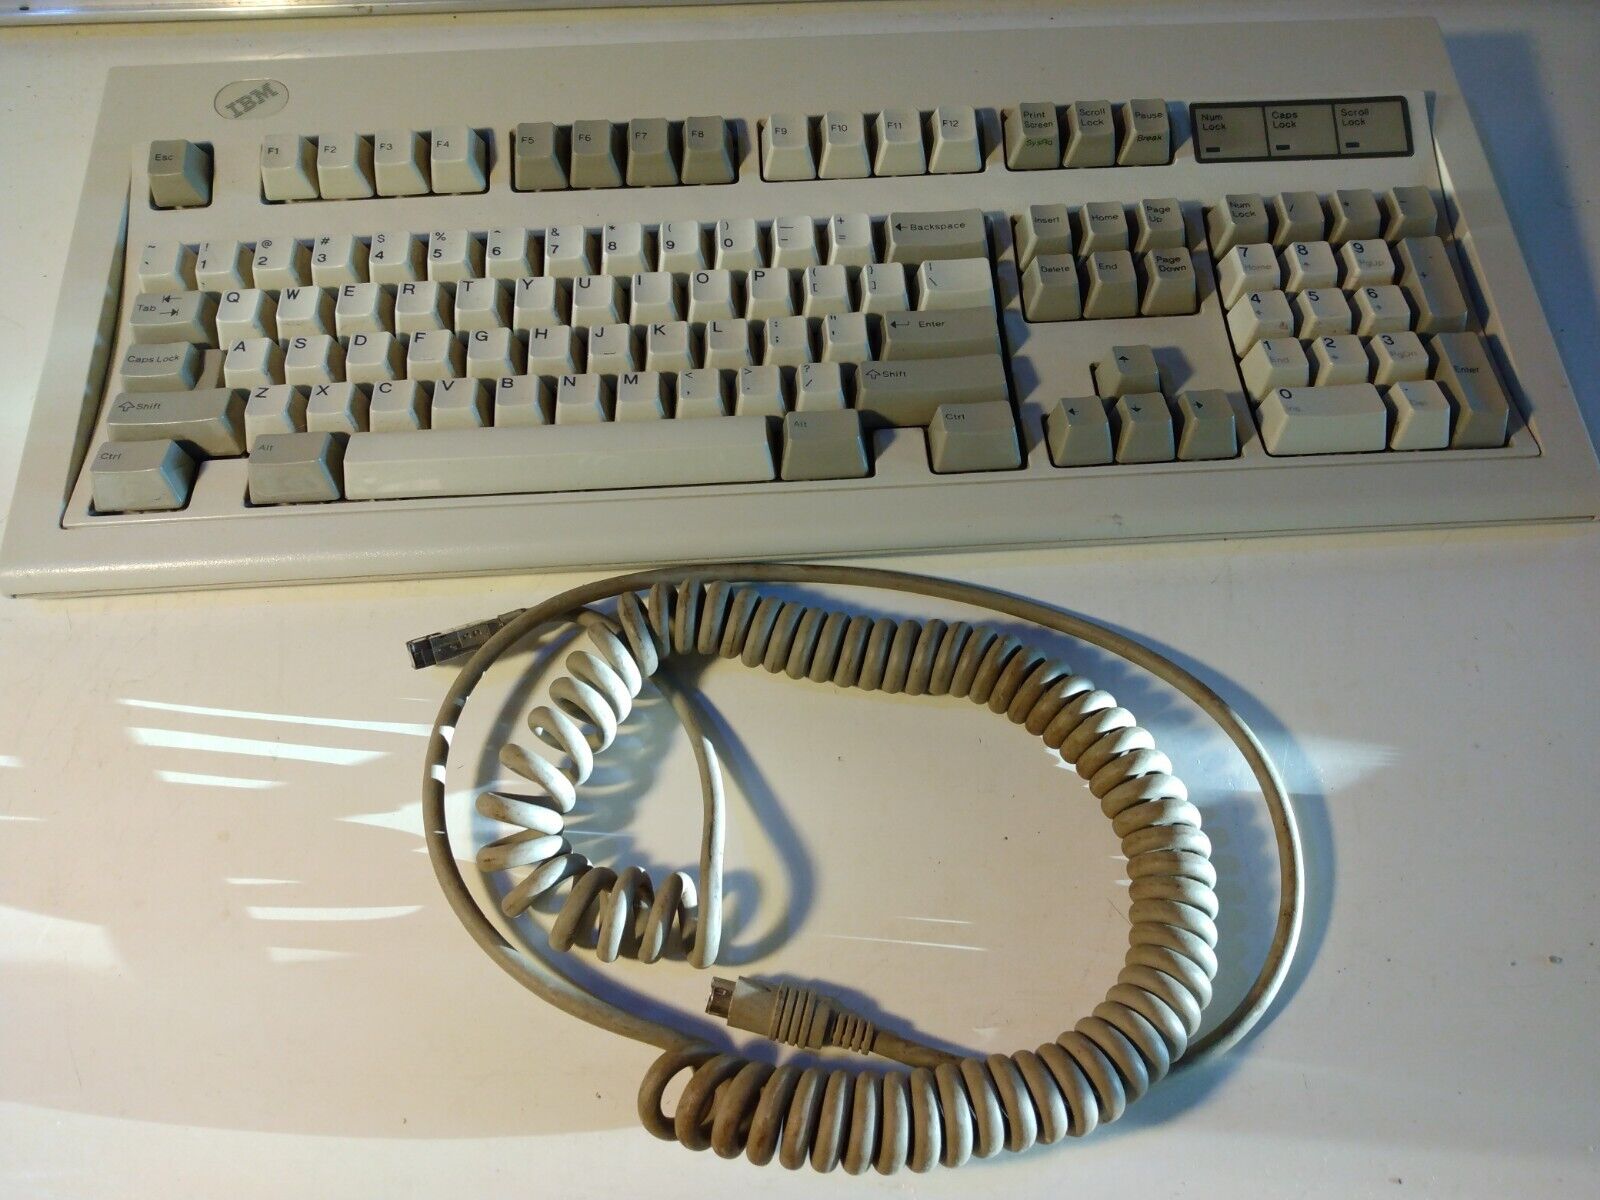 IBM Model M Keyboard 1391401 - PS2 Cable - Dec 18, 1989